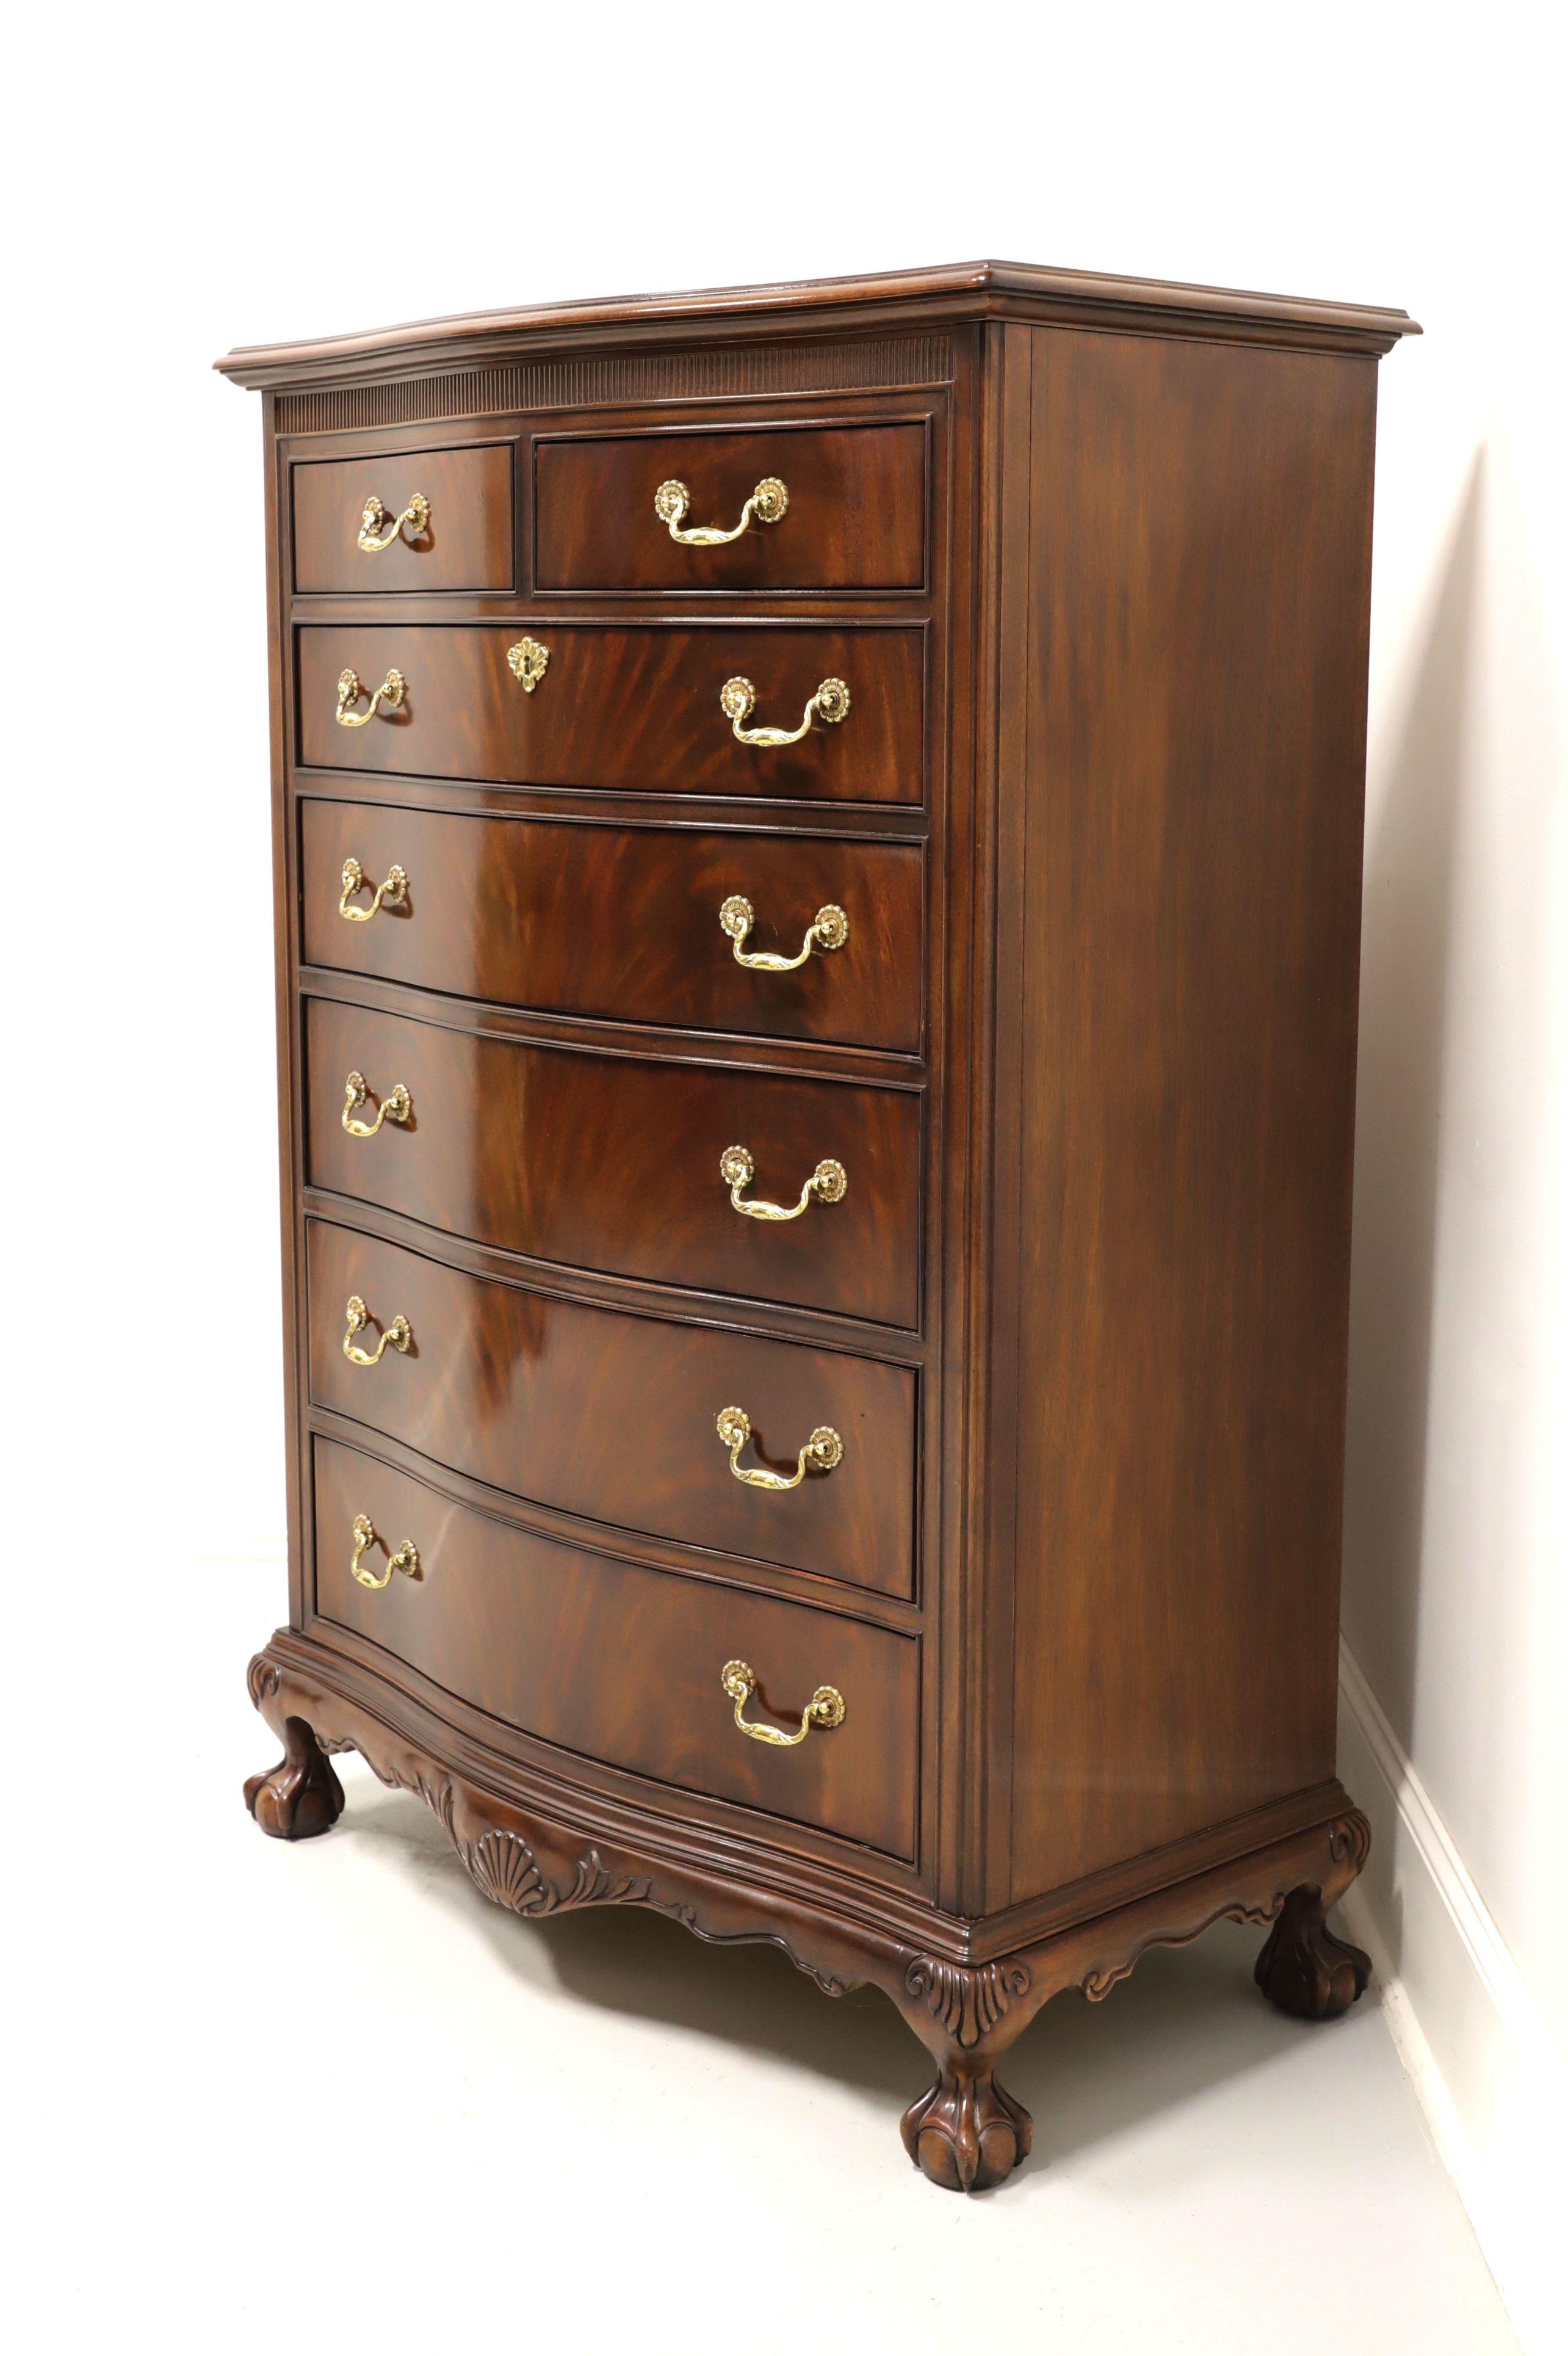 American DREXEL HERITAGE Heirlooms Flame Mahogany Chippendale Serpentine Chest of Drawers